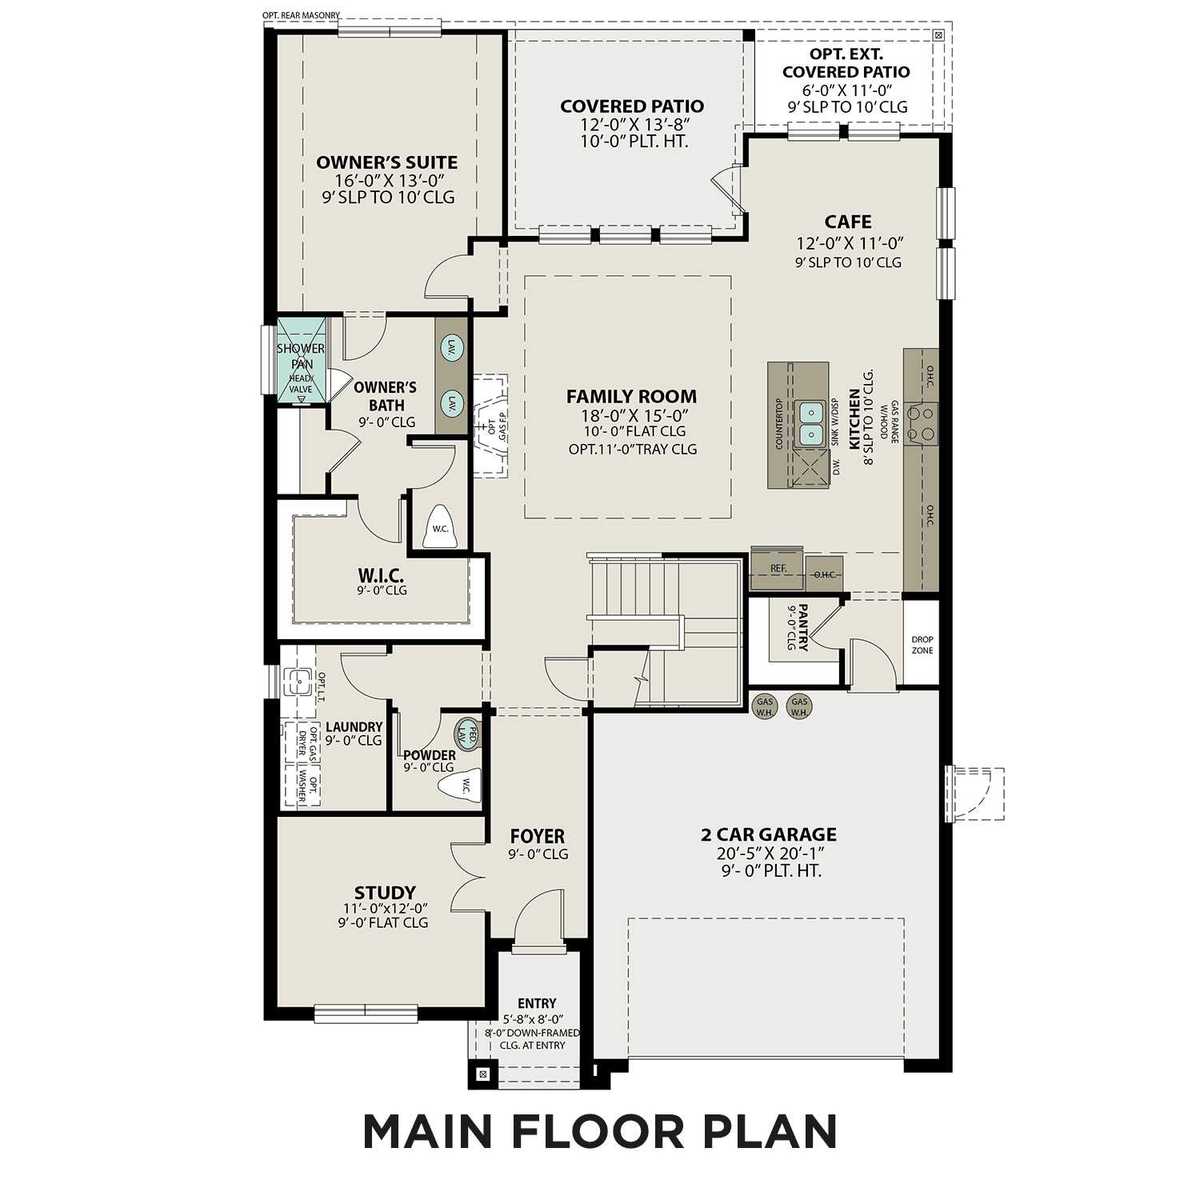 1 - The Sequoia A buildable floor plan layout in Davidson Homes' Sierra Vista community.